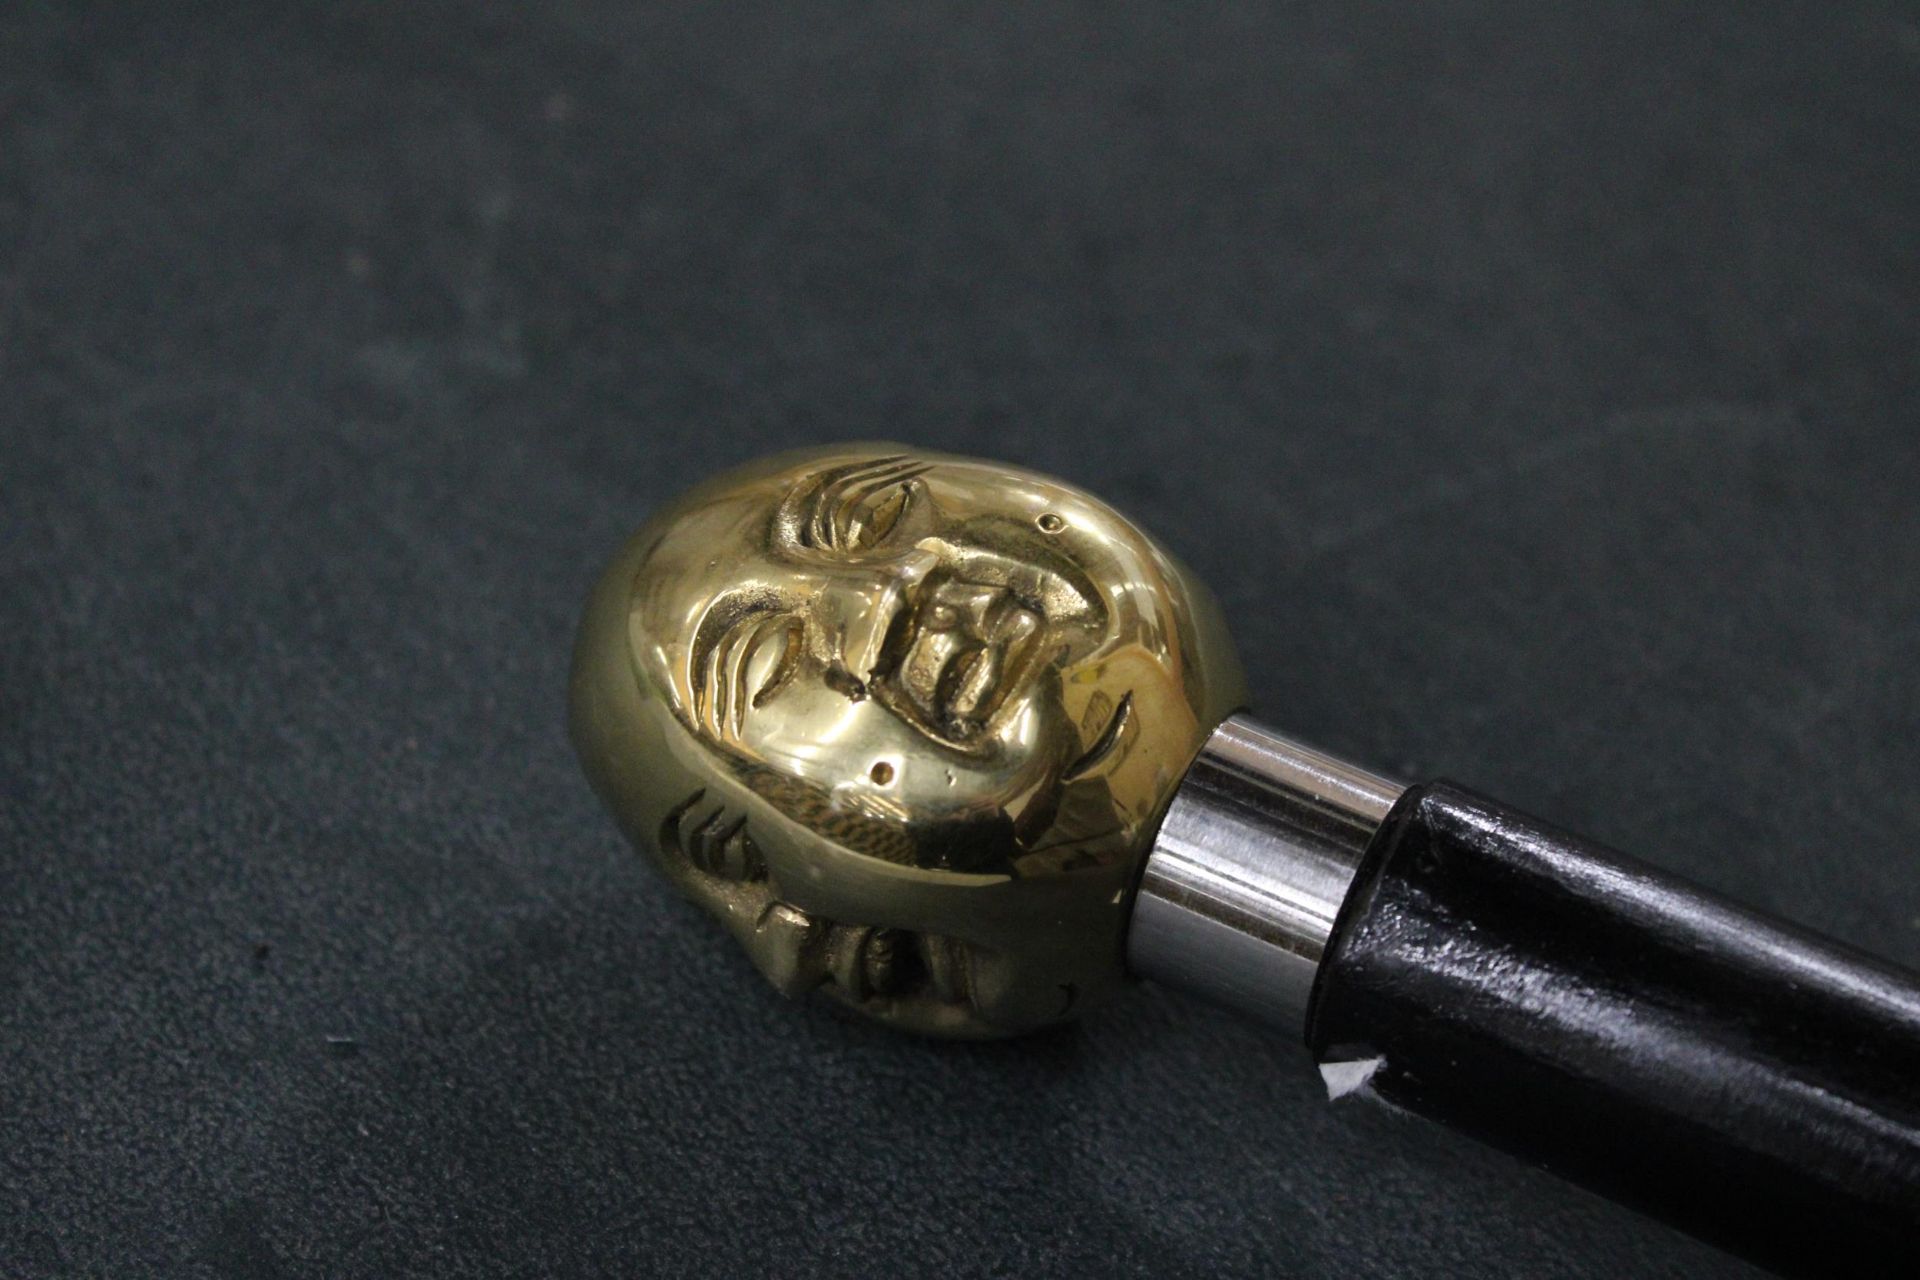 A BRASS FOUR FACED BUDDHA HANDLE WALKING STICK - Image 5 of 6